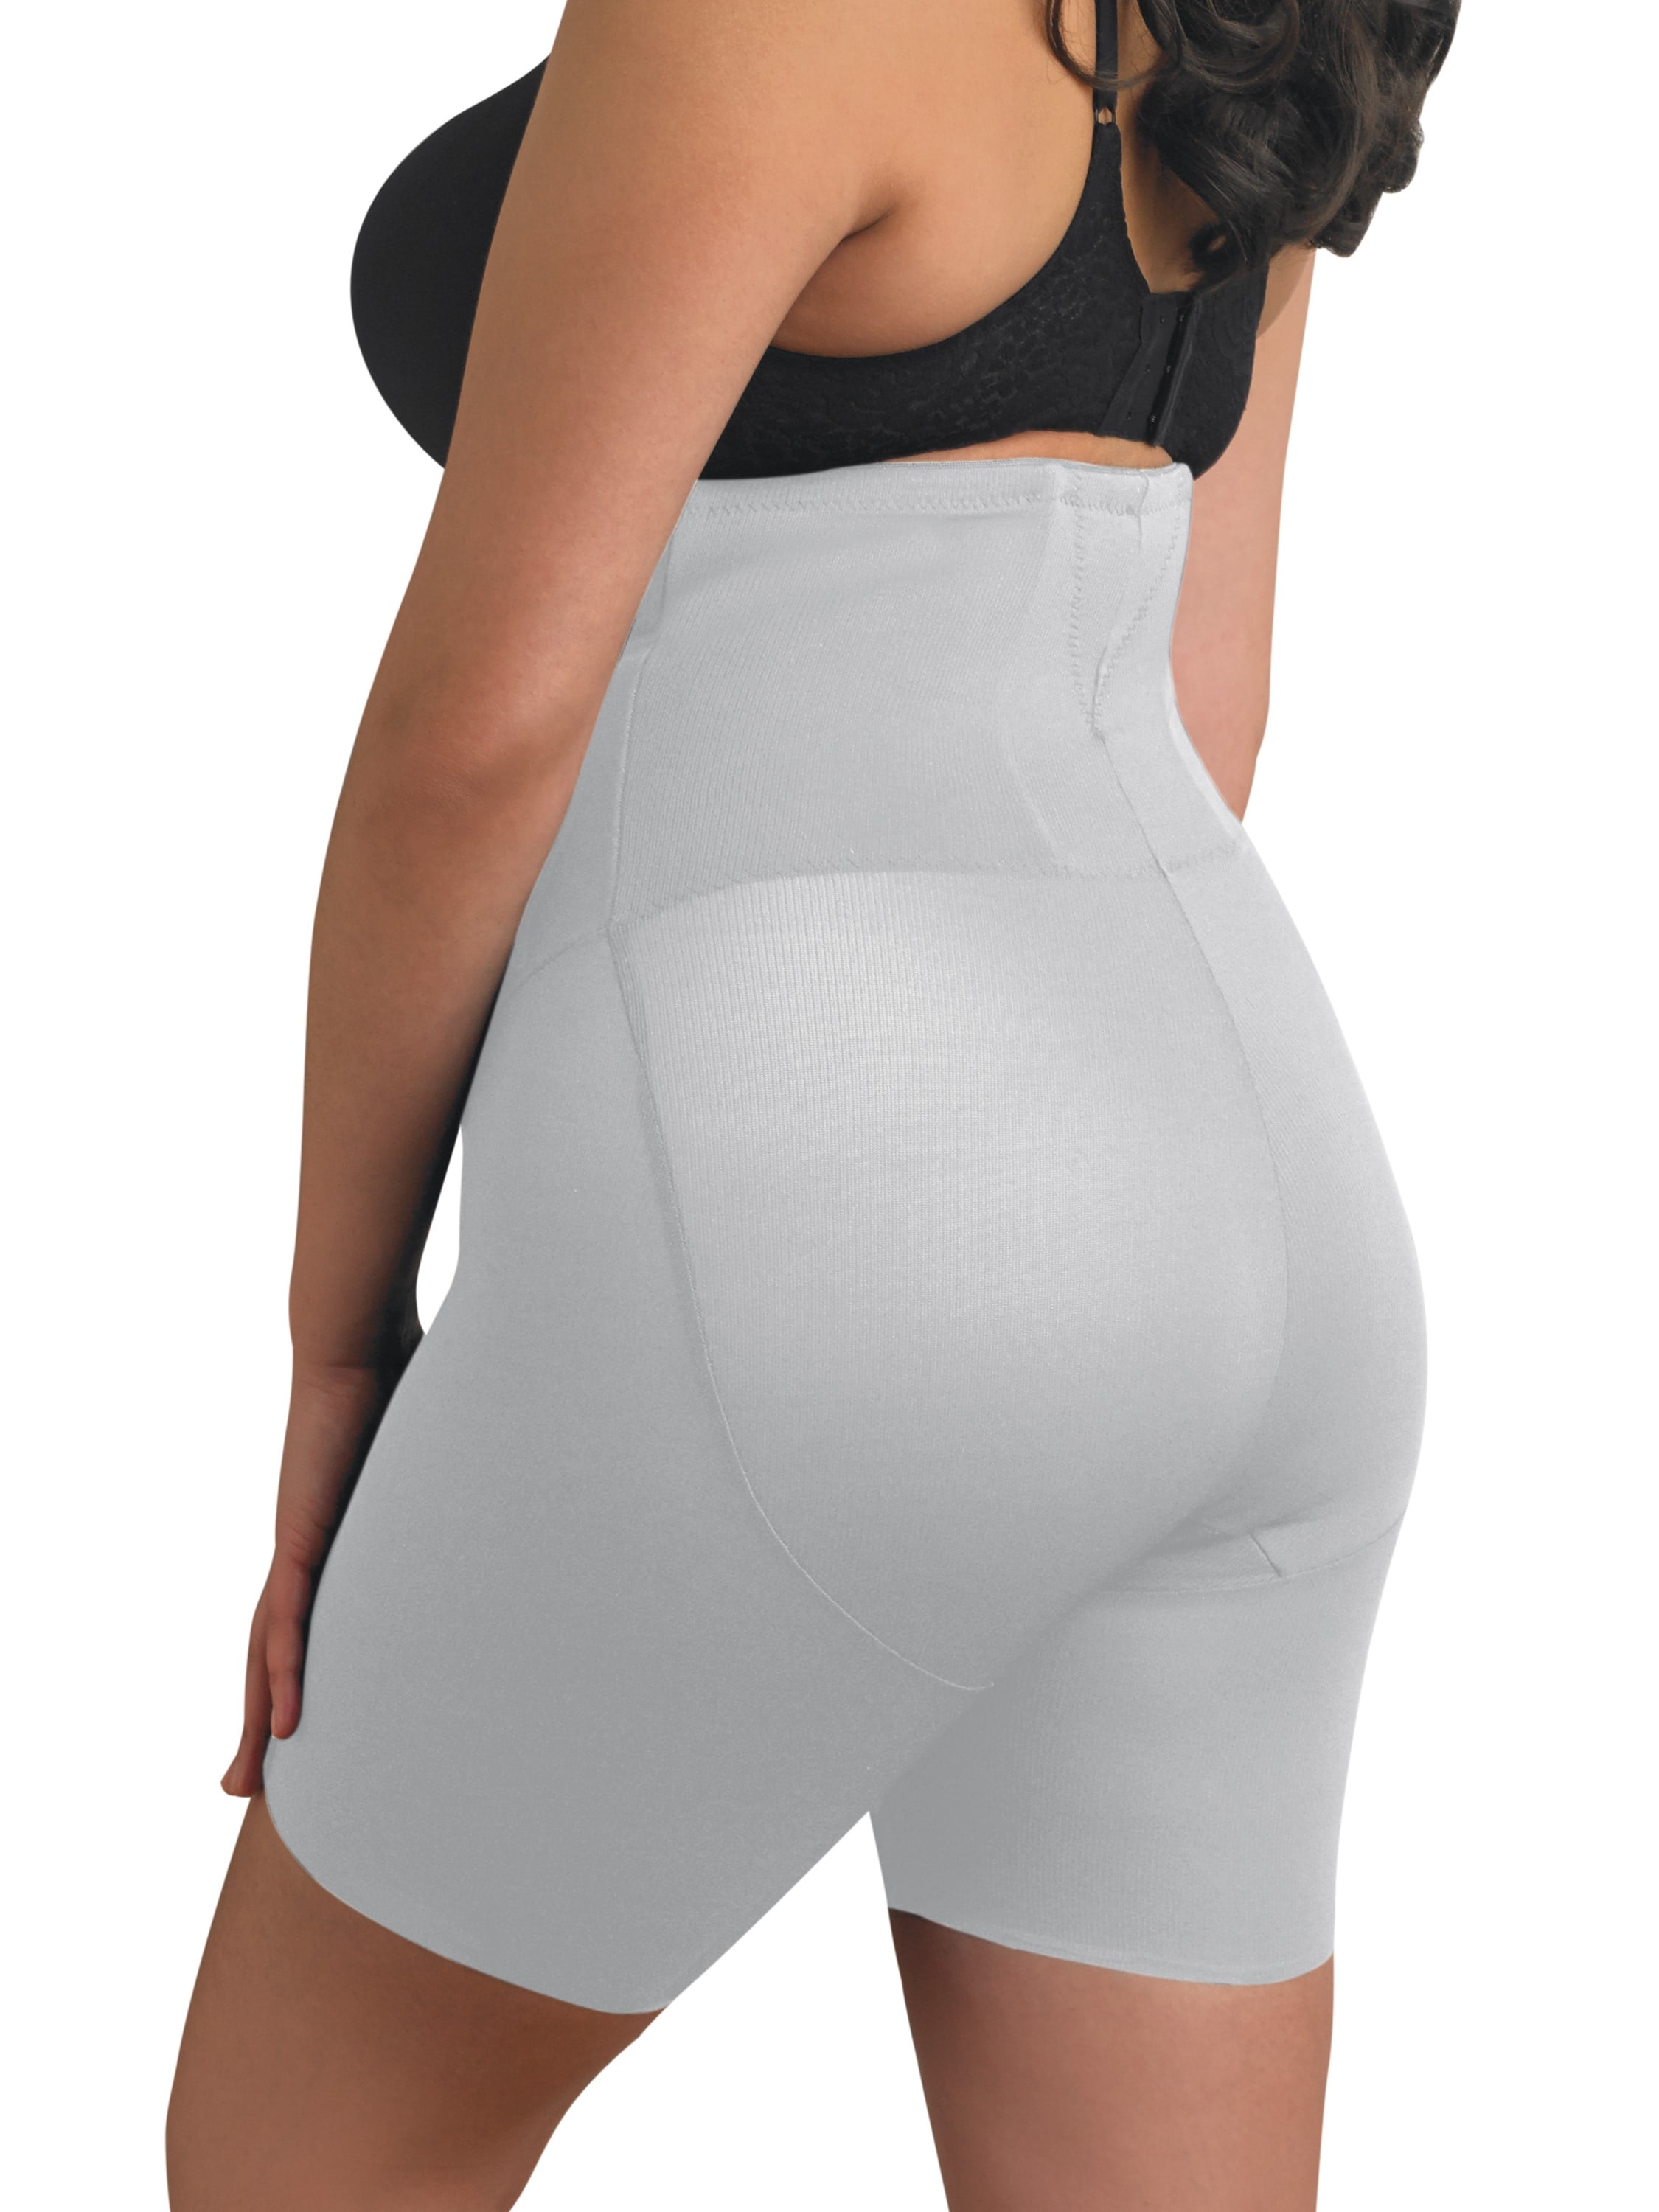 Secret Slimmers – Firm Control Shaping Slip